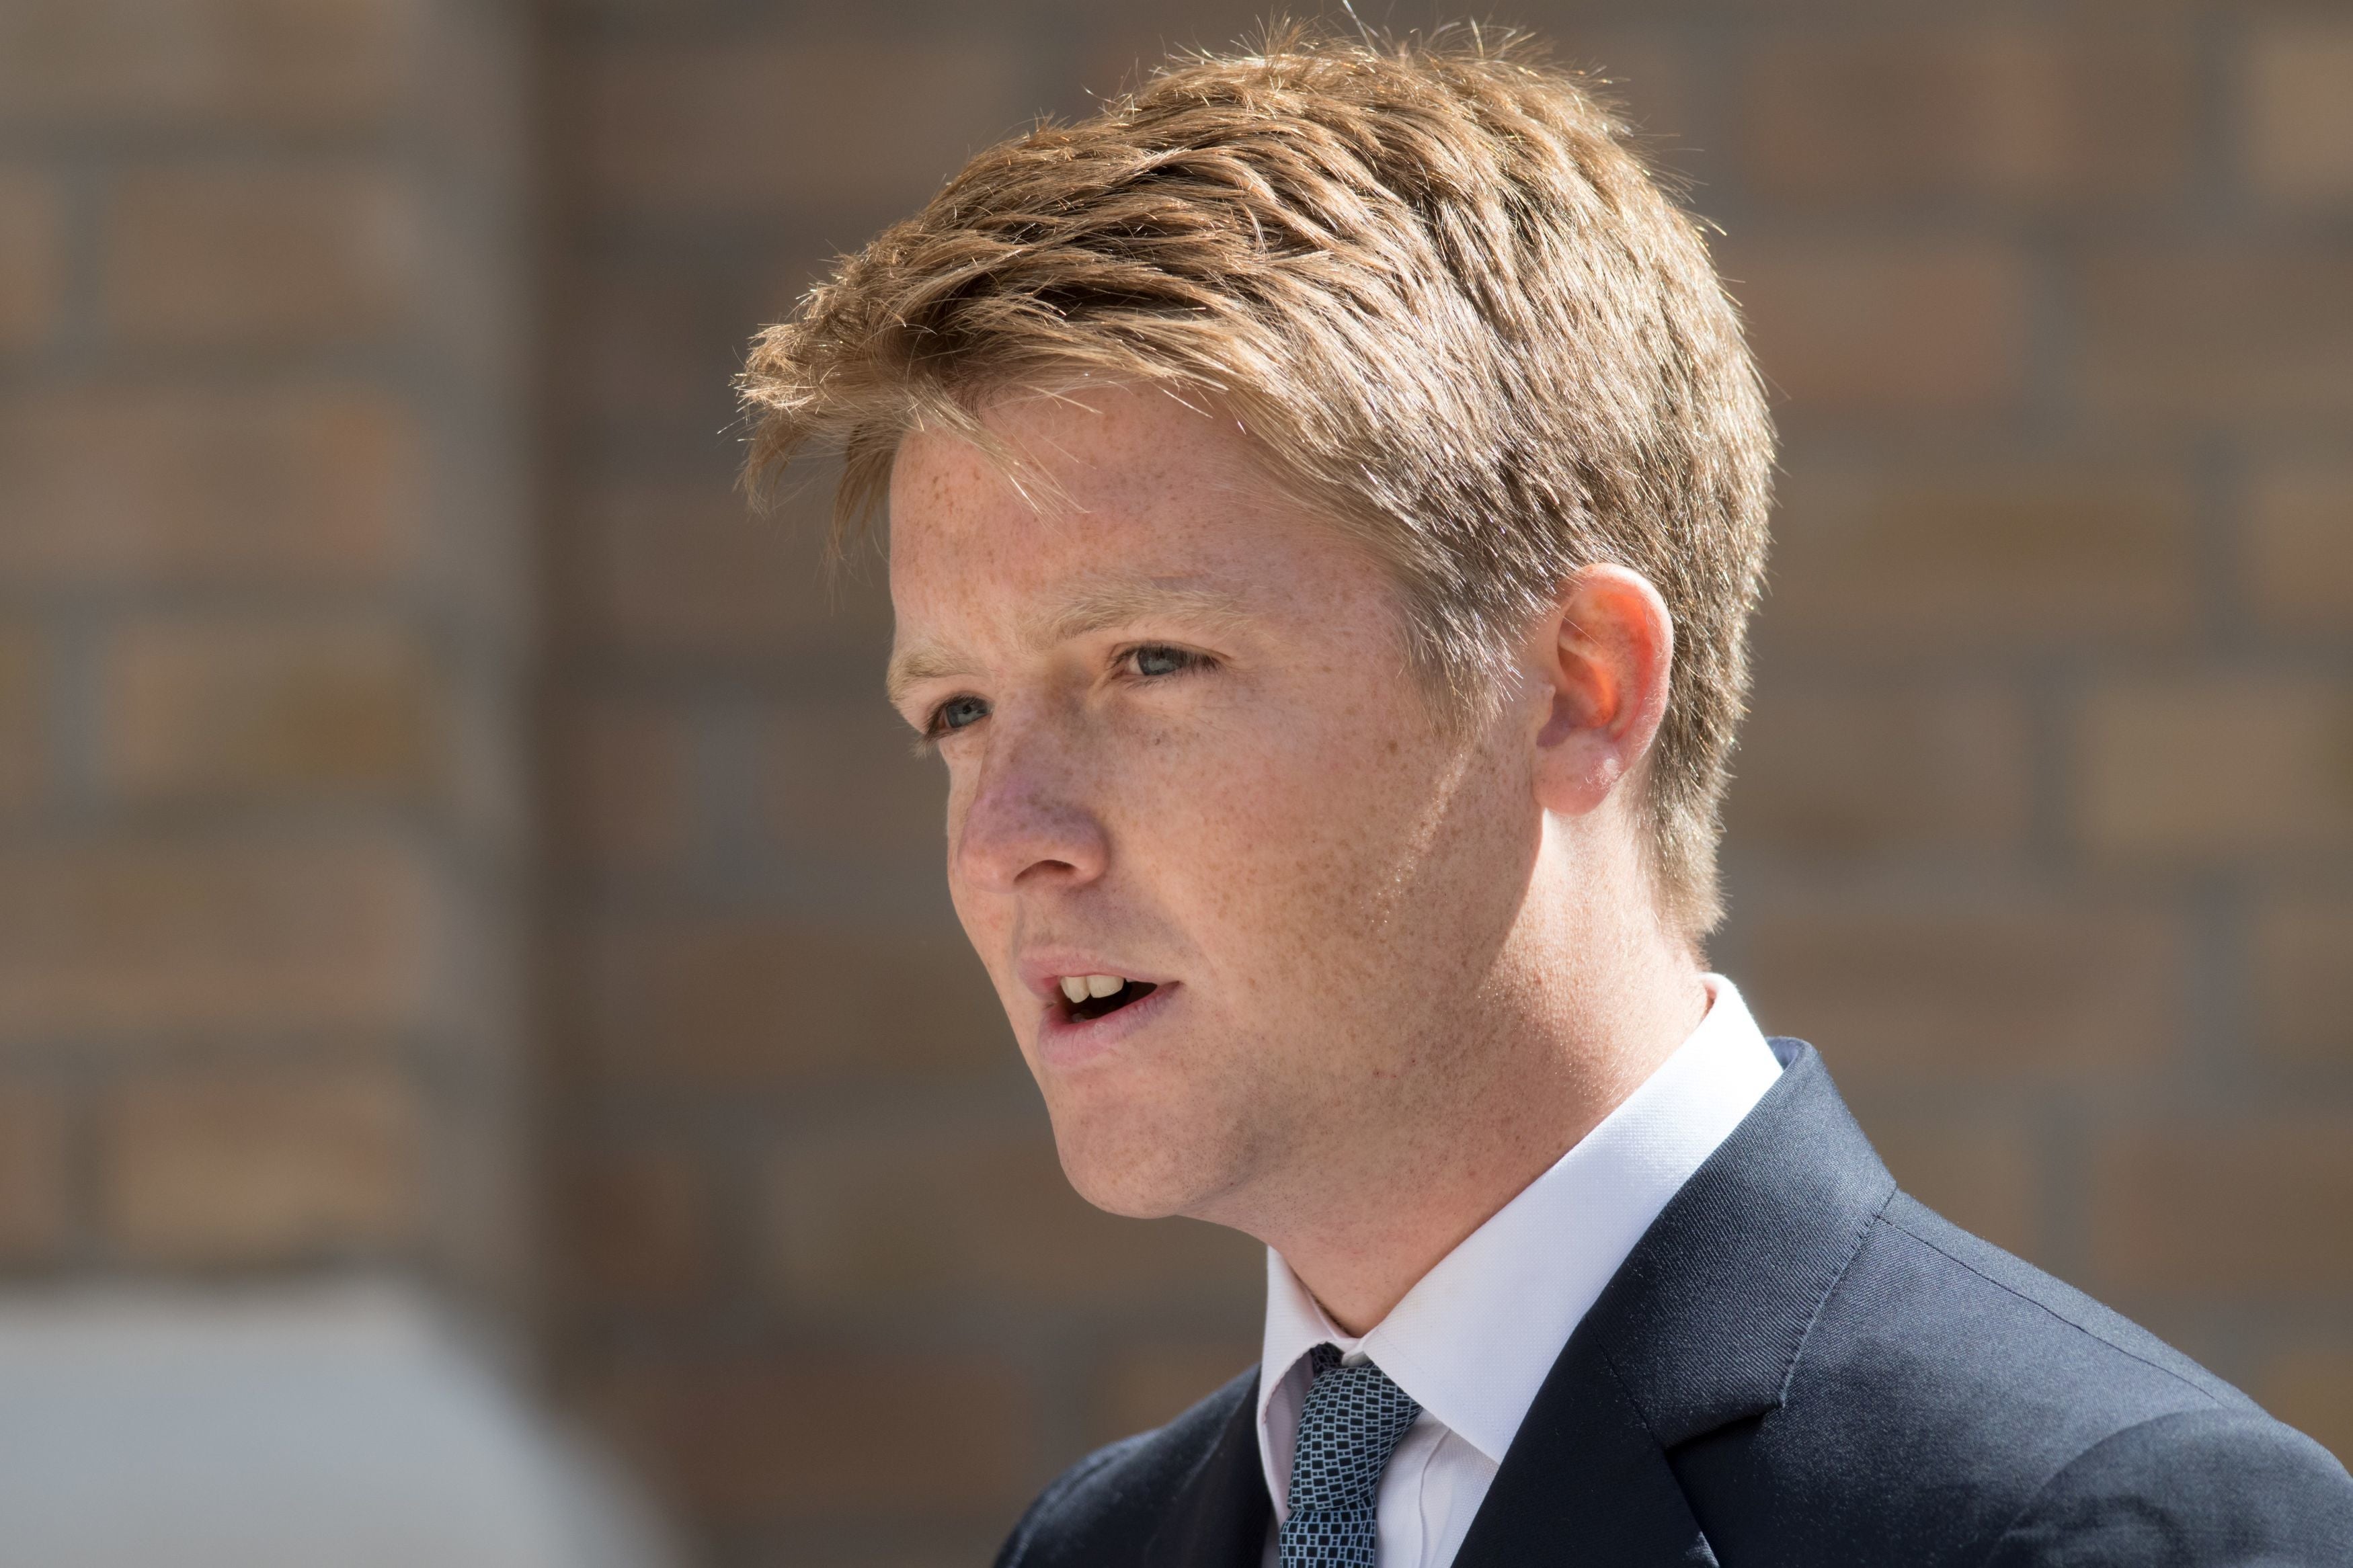 Hugh Grosvenor, 7th Duke of Westminster, is the third richest man in the United Kingdom